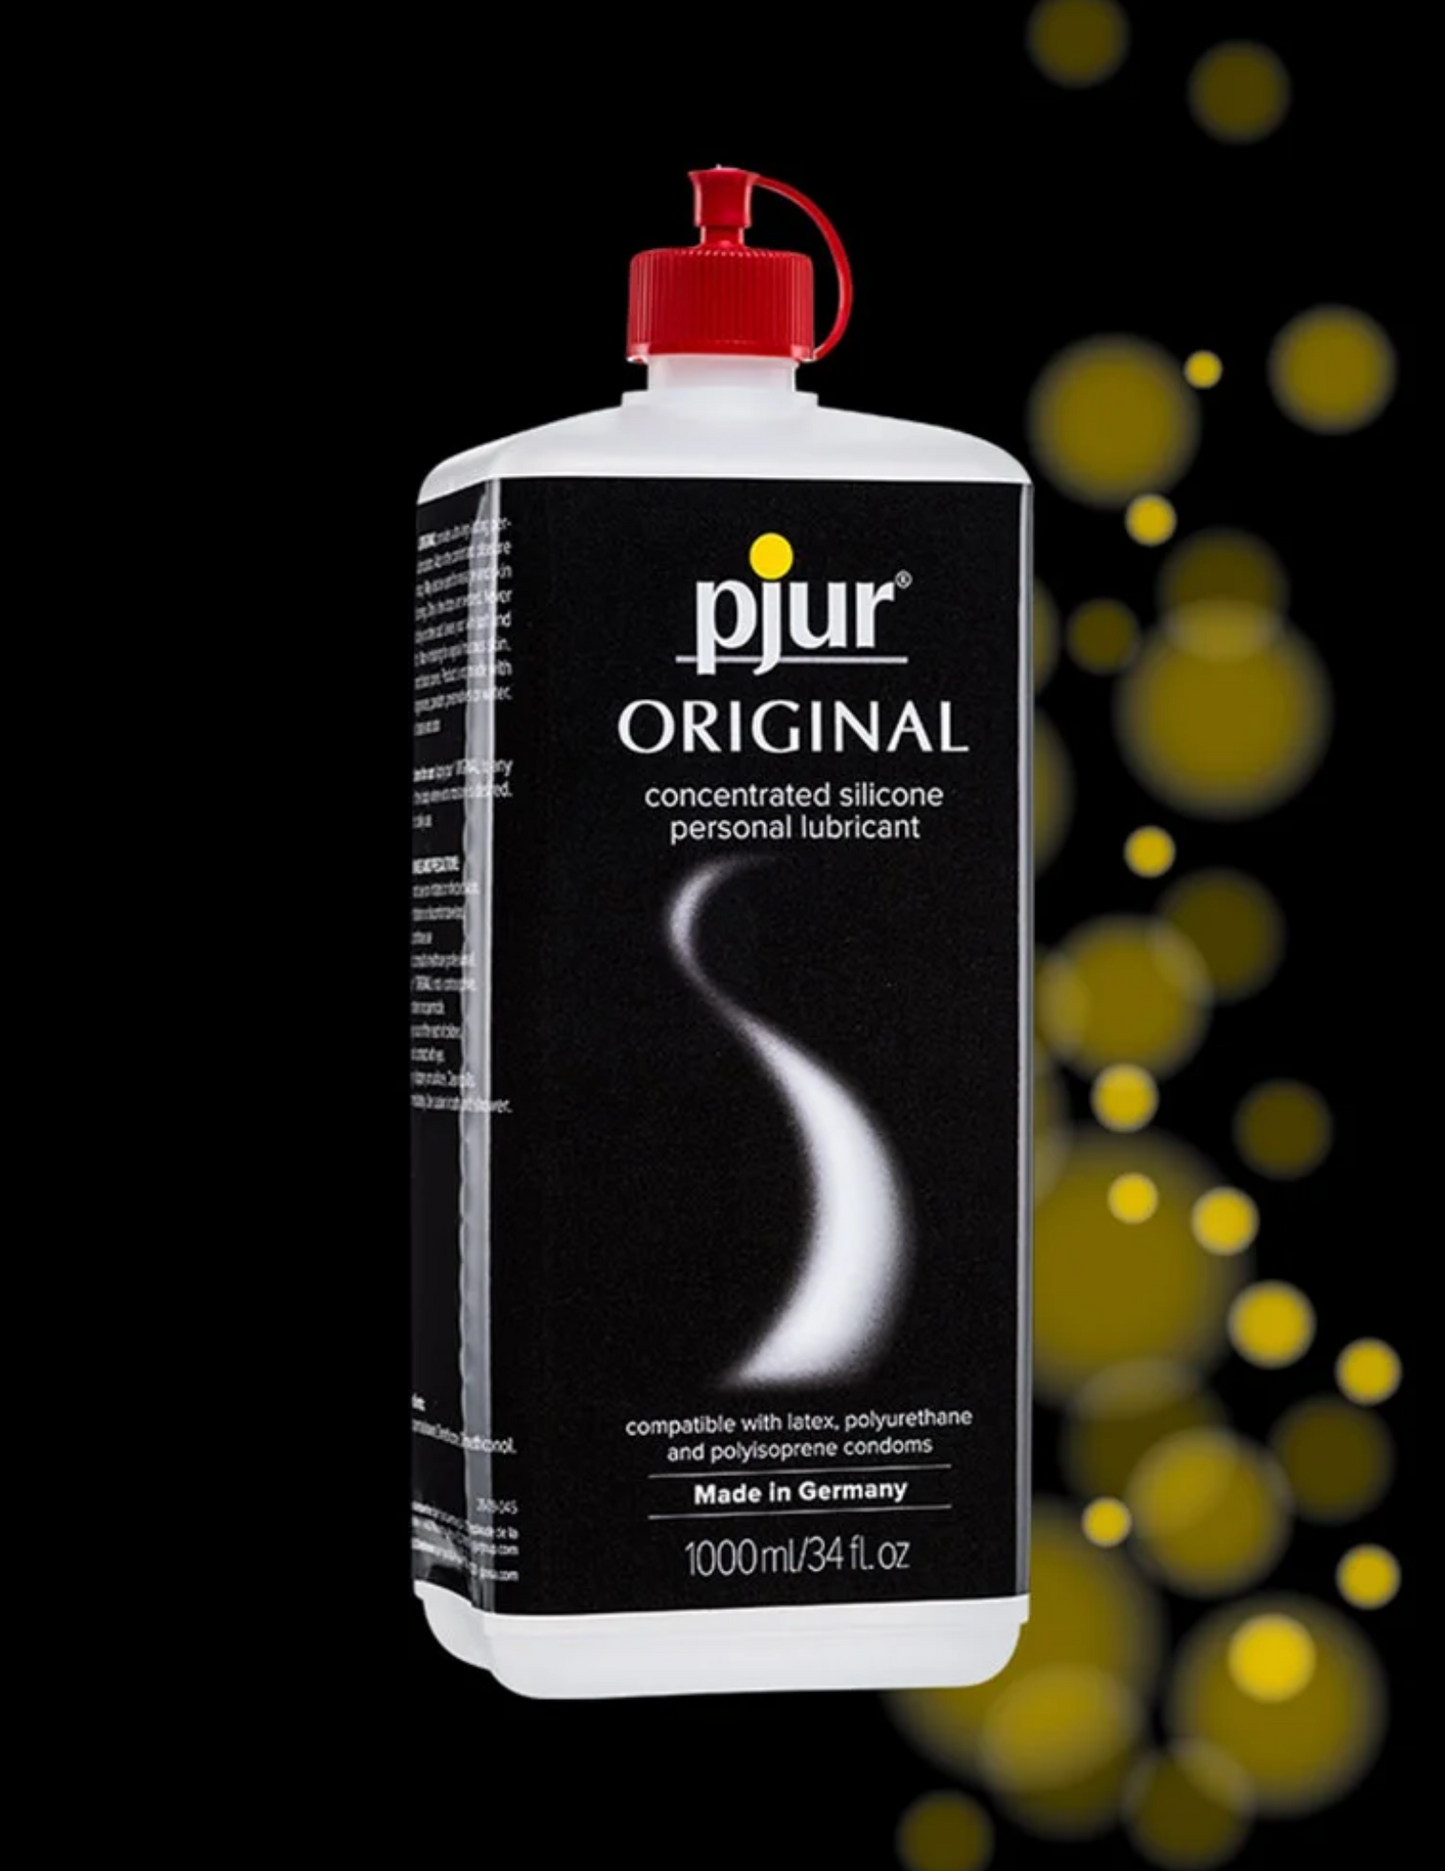 Ad for the Pjur Original Concentrated Silicone Lubricant in 34oz.